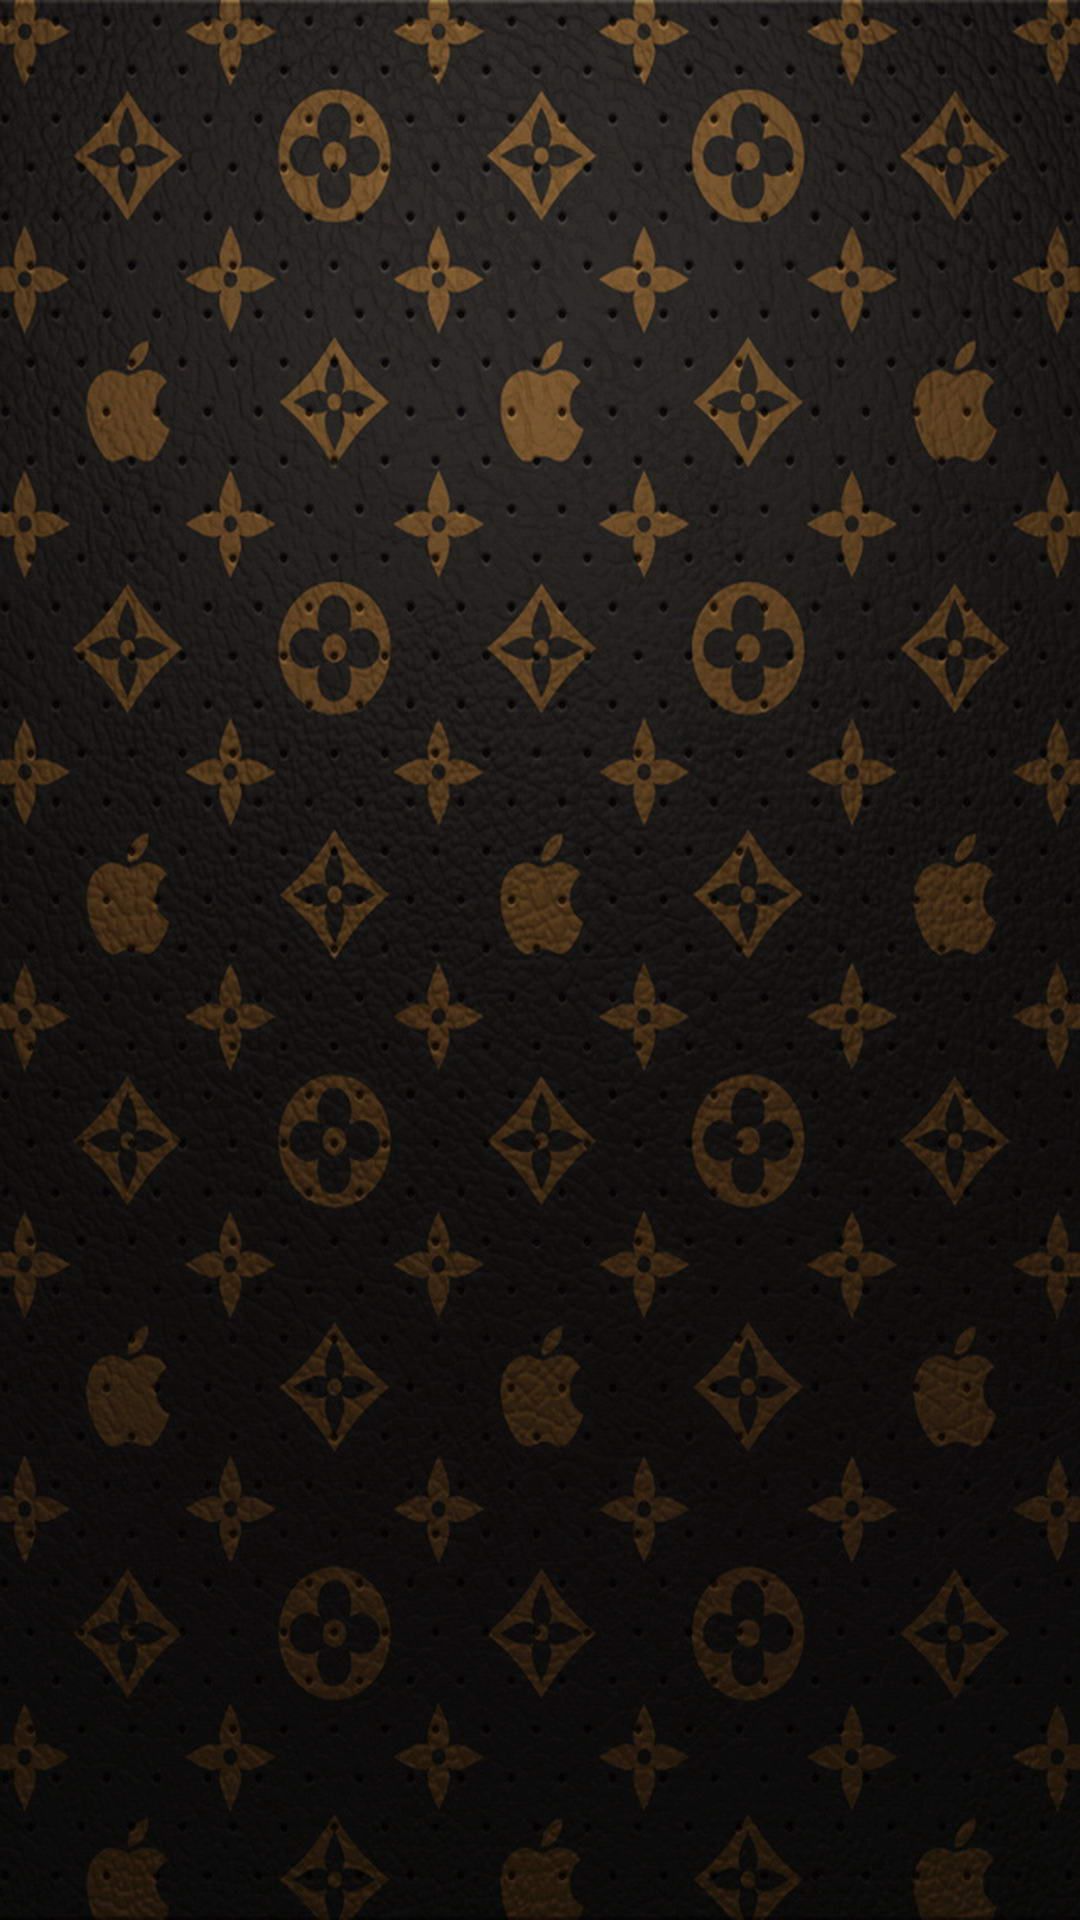 iPhone X Wallpapers  Louis vuitton iphone wallpaper, Gucci